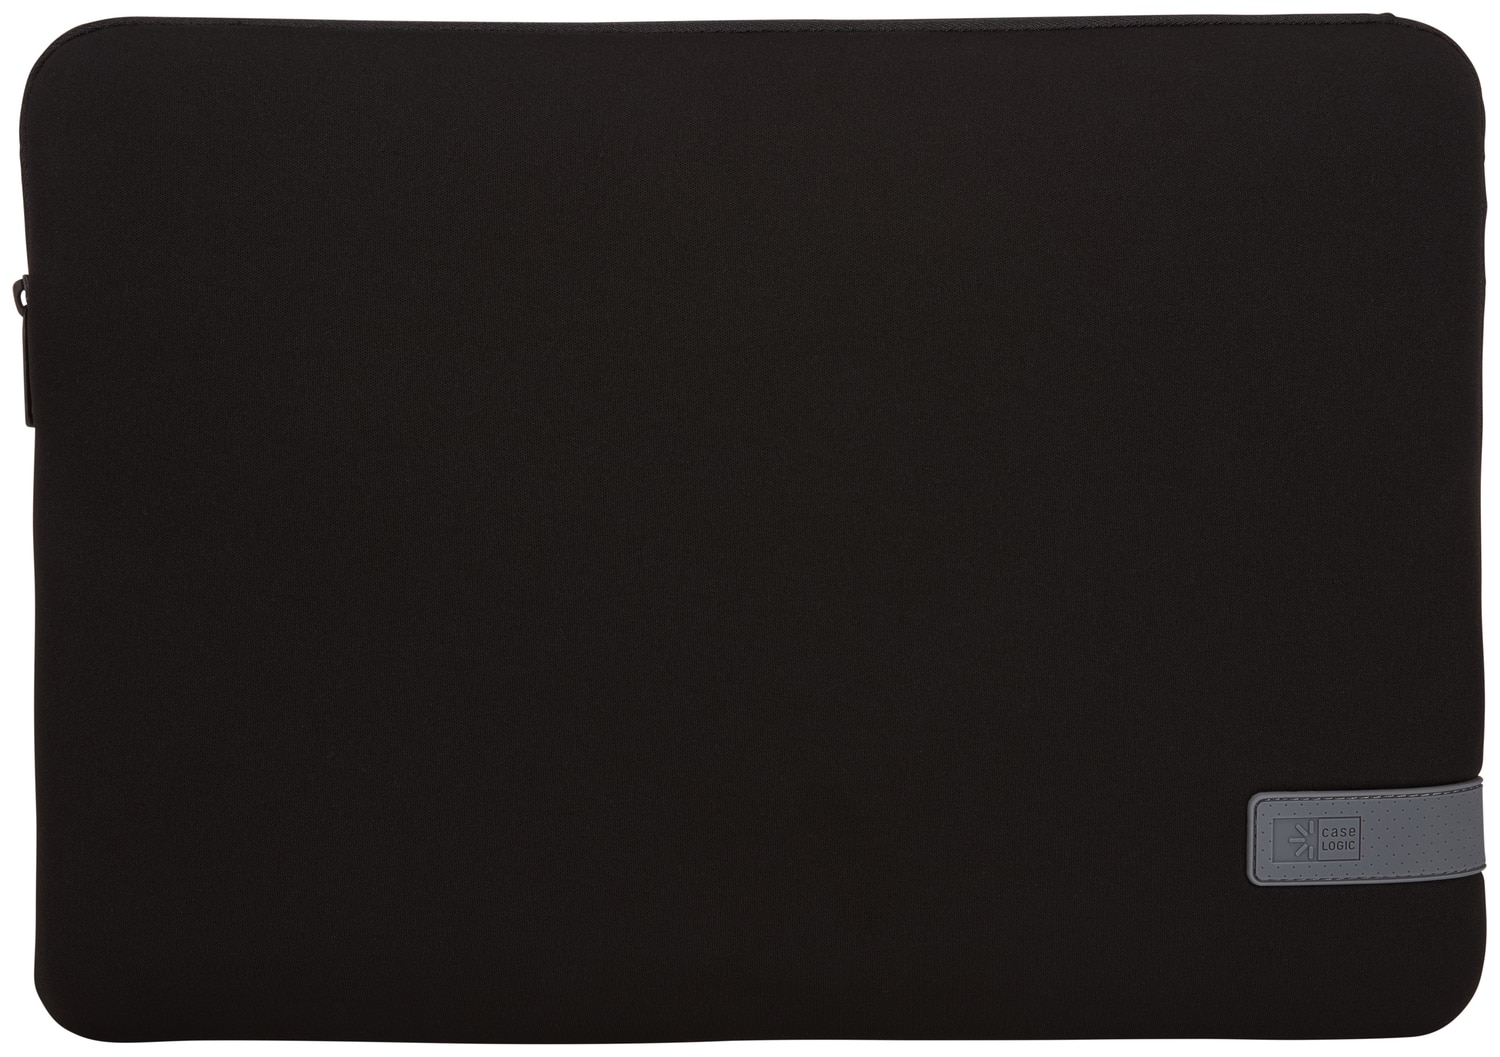 Reflect 15.6-inch Laptop Sleeve